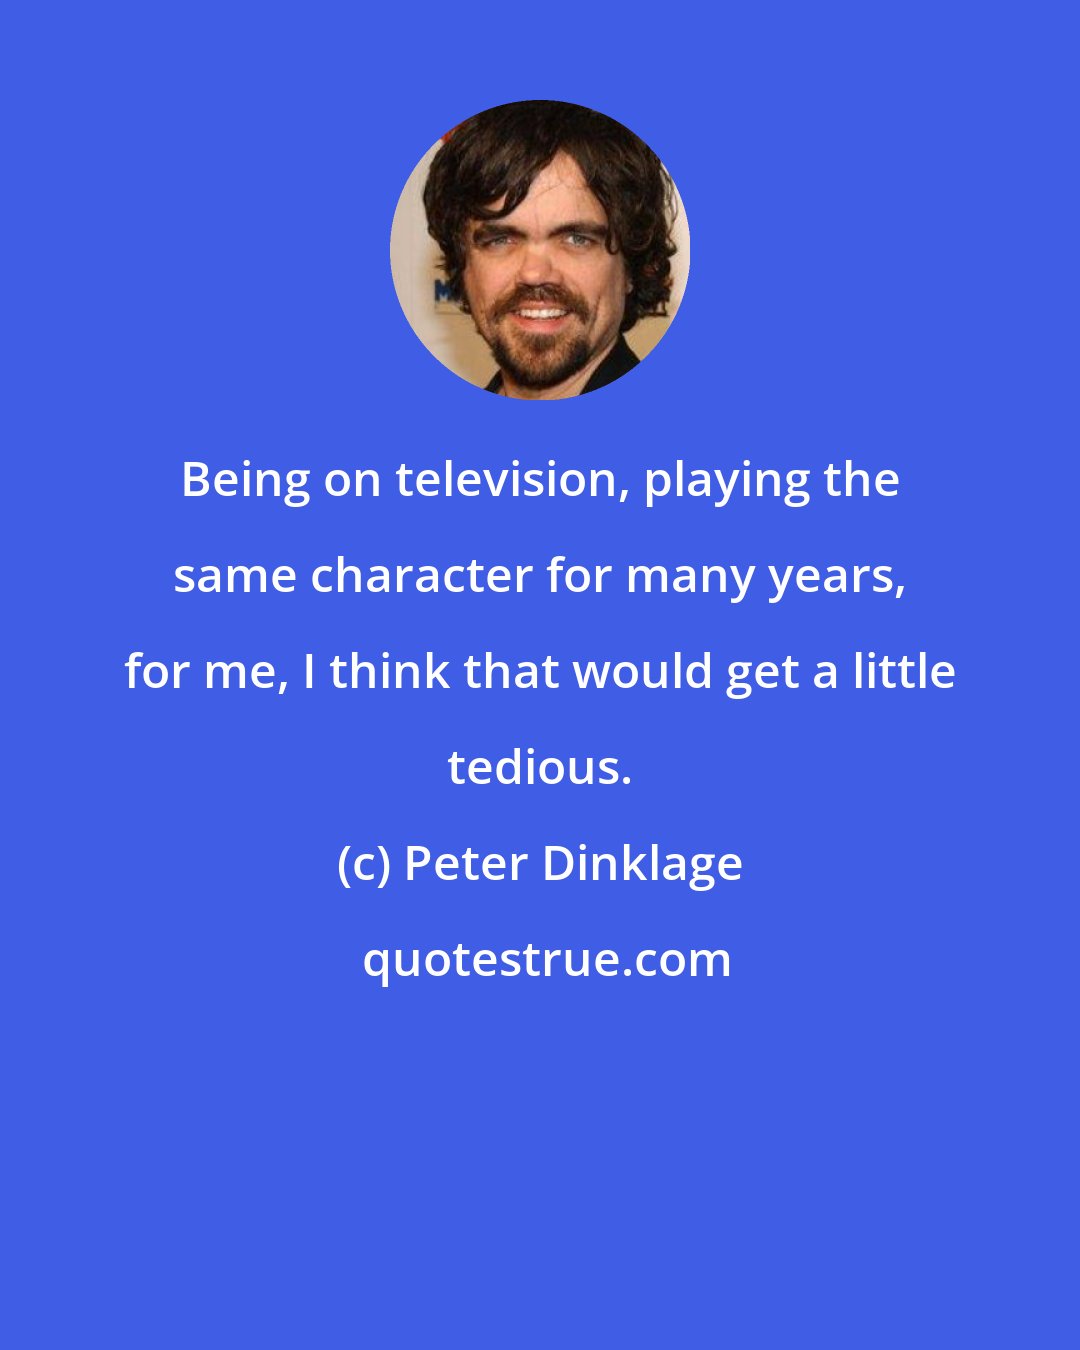 Peter Dinklage: Being on television, playing the same character for many years, for me, I think that would get a little tedious.